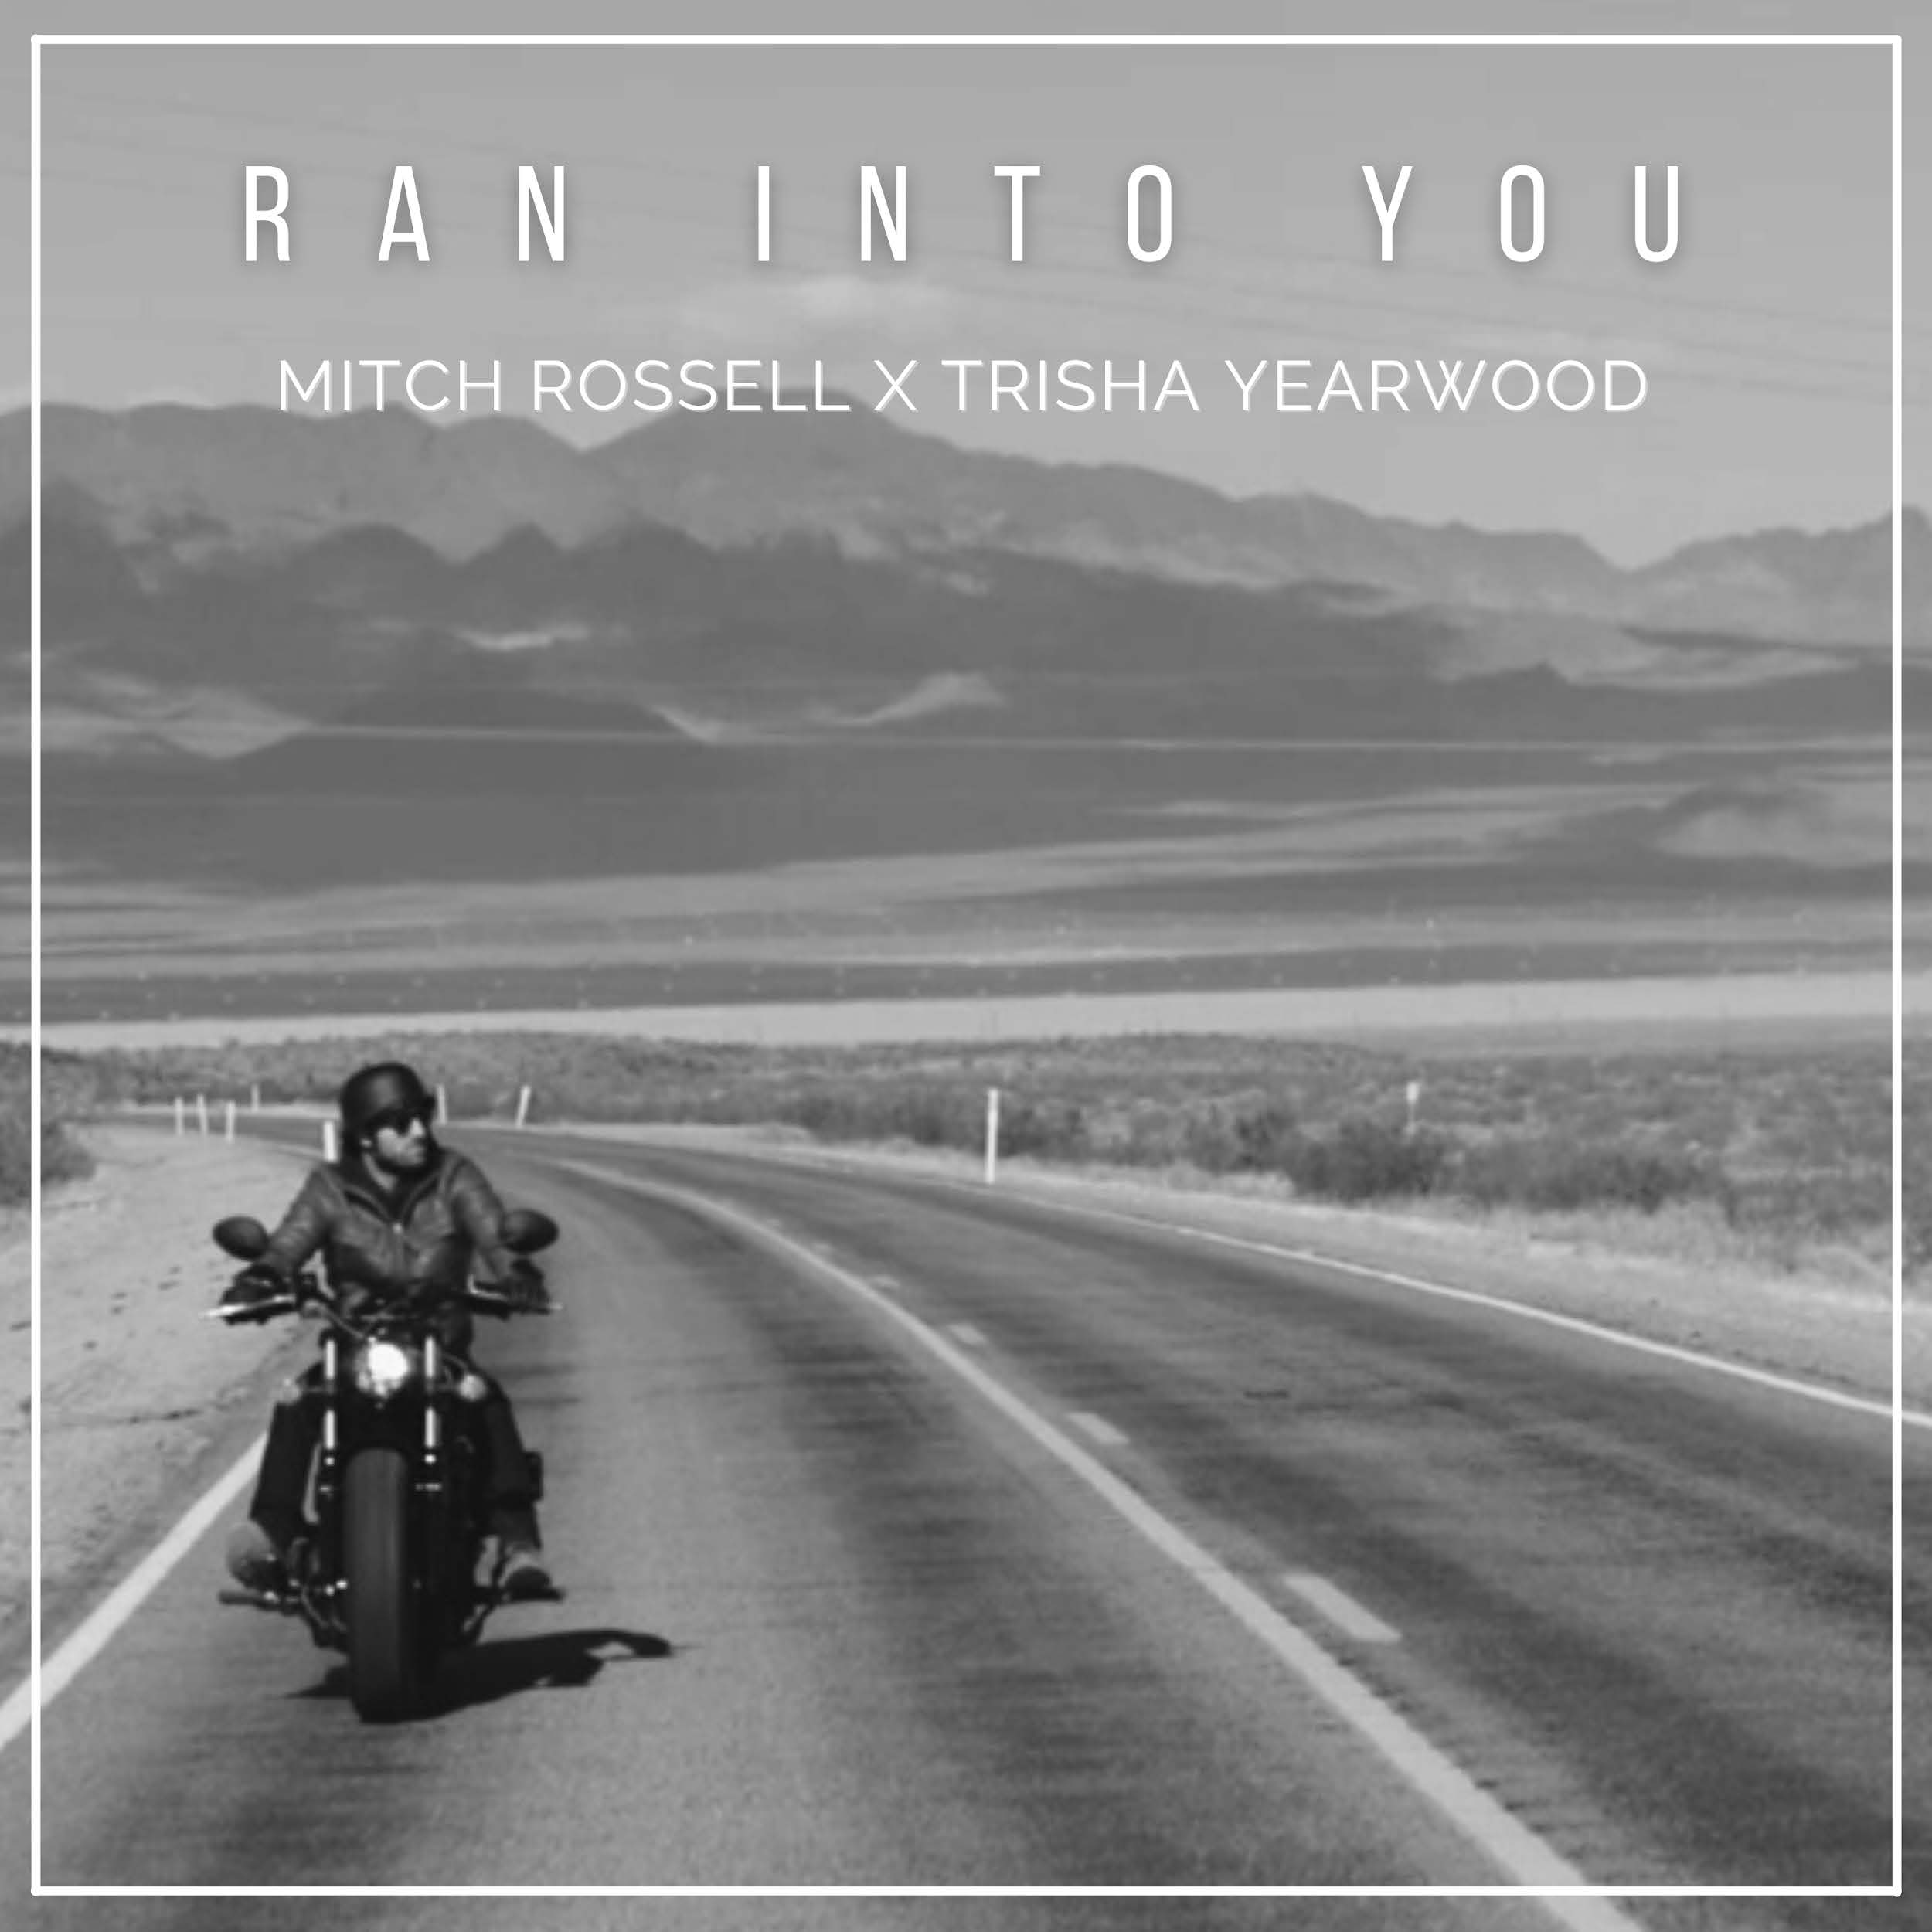 Mitch Rossell's new song, "Ran into You" featuring Trisha Yearwood is available now, March 30th